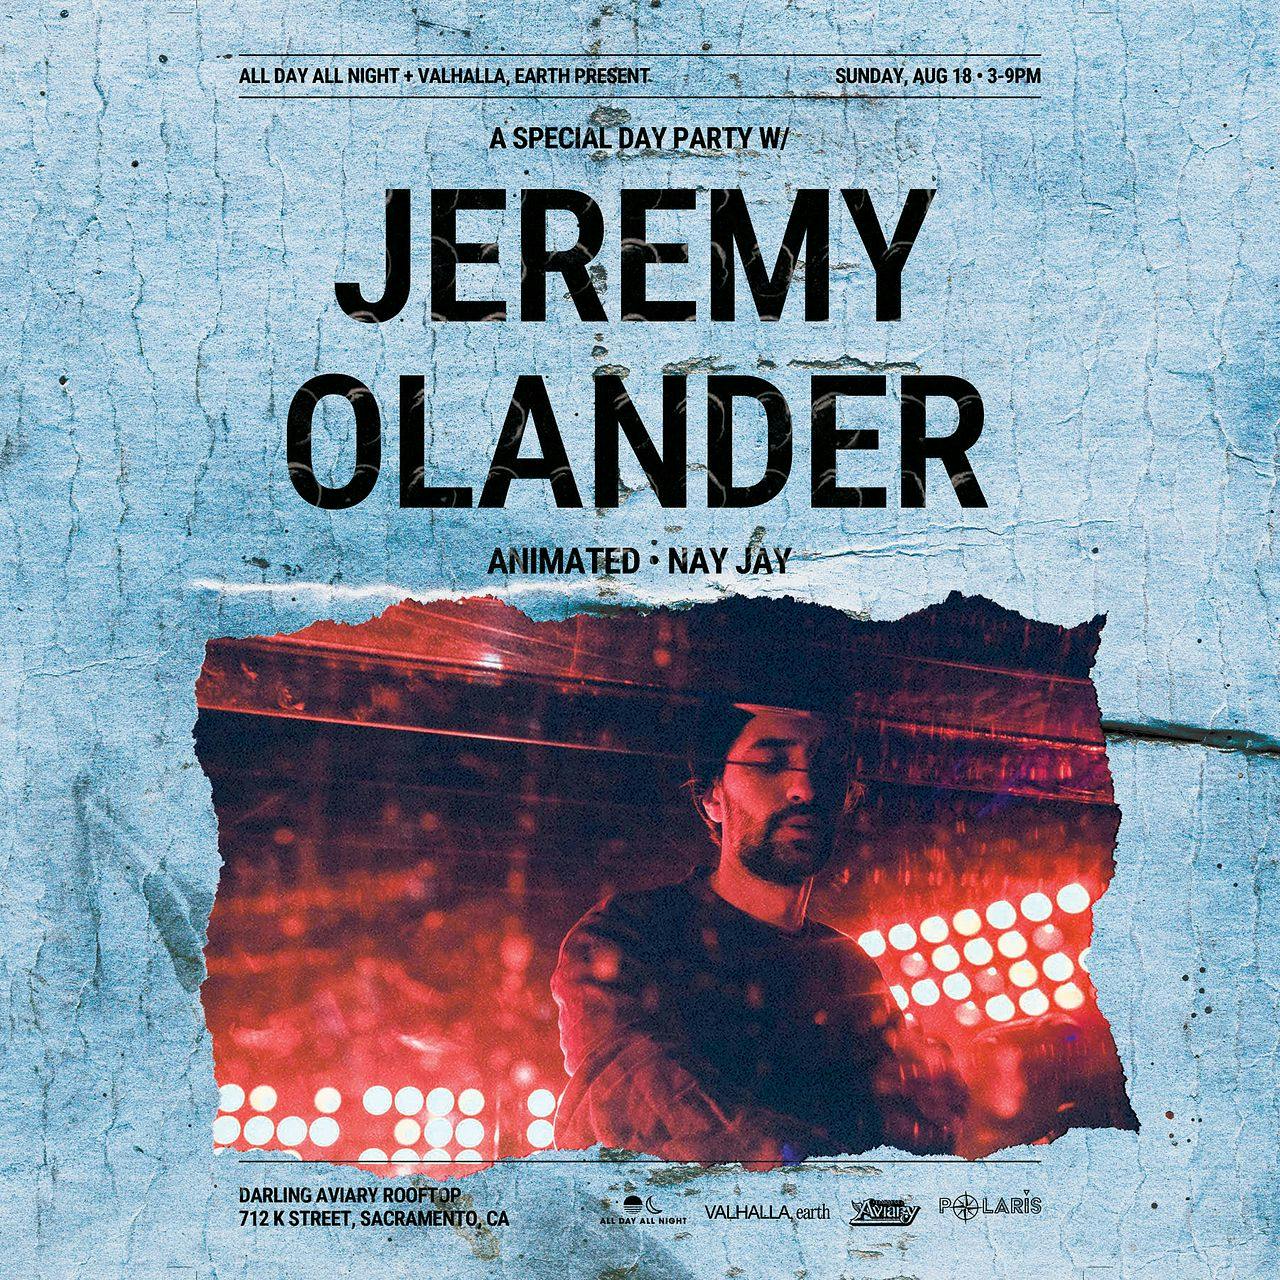 Day Party w/ JEREMY OLANDER at Darling Aviary